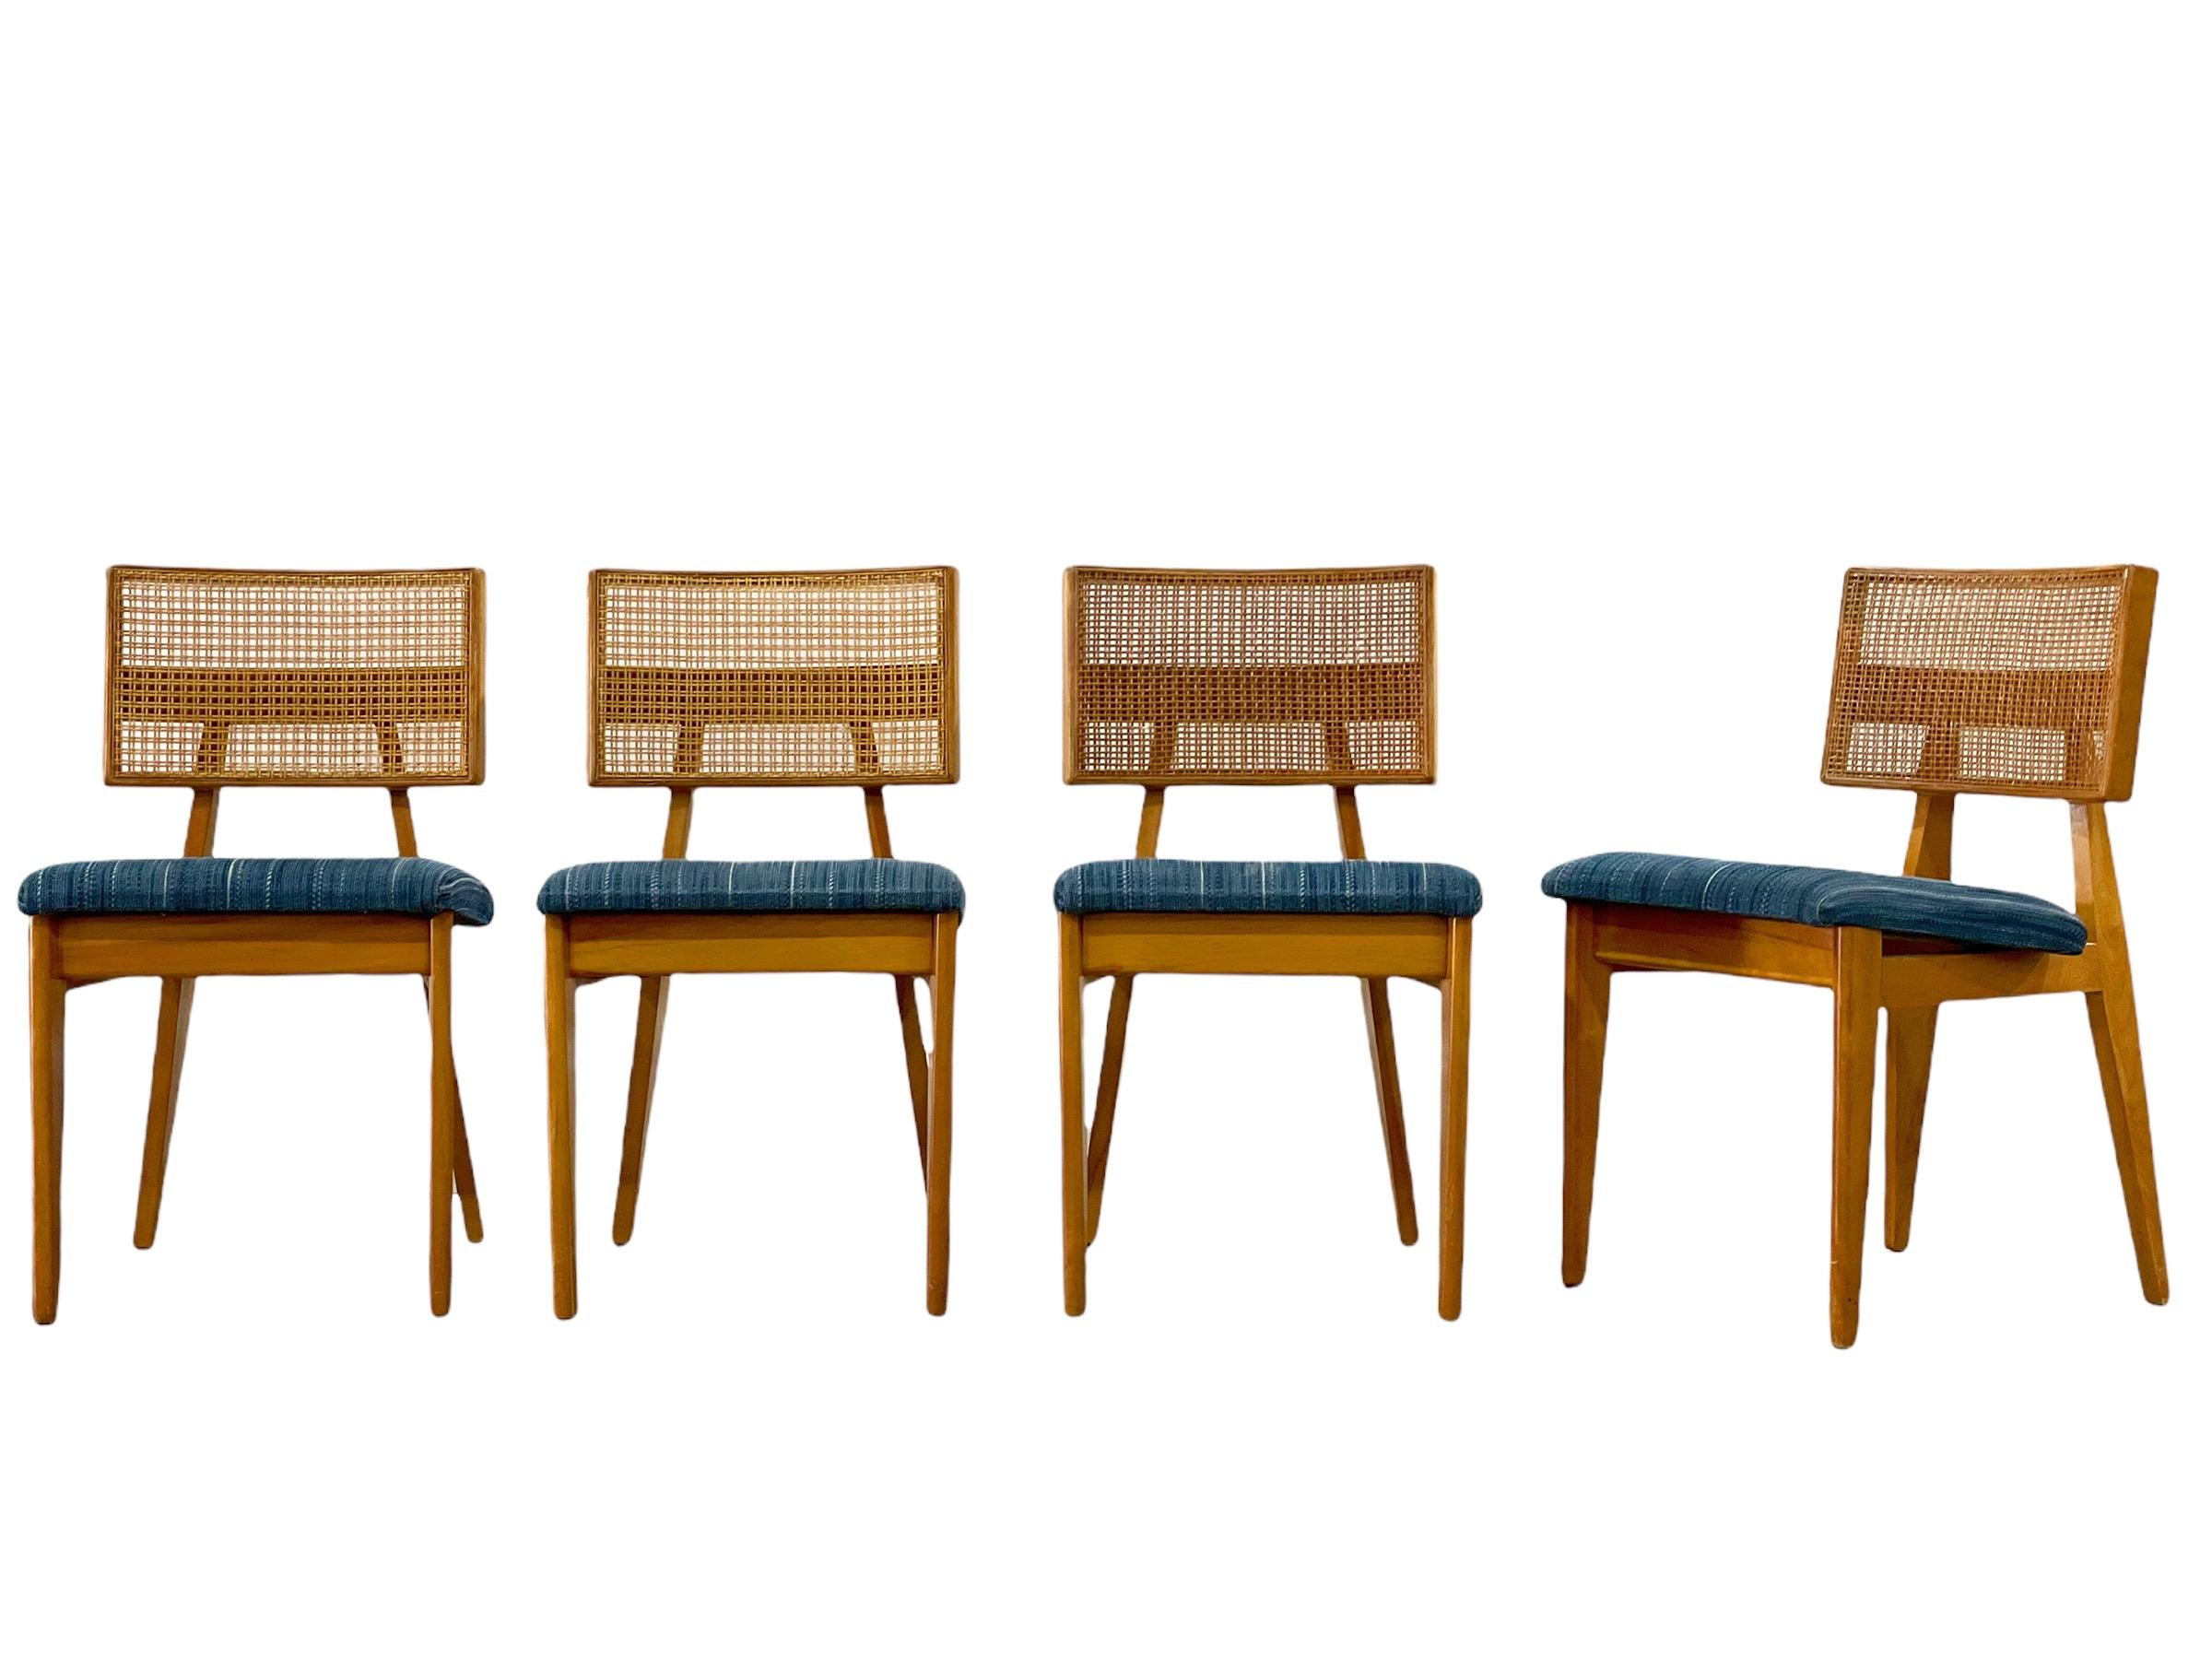 Rare set of four Mid-Century Modern dining chairs by Ernest Farmer for George Nelson Associates and produced by Herman Miller. Solid maple frames with cane backs and upholstered seats. Cane is intact on all four backs. Frames have been thoroughly